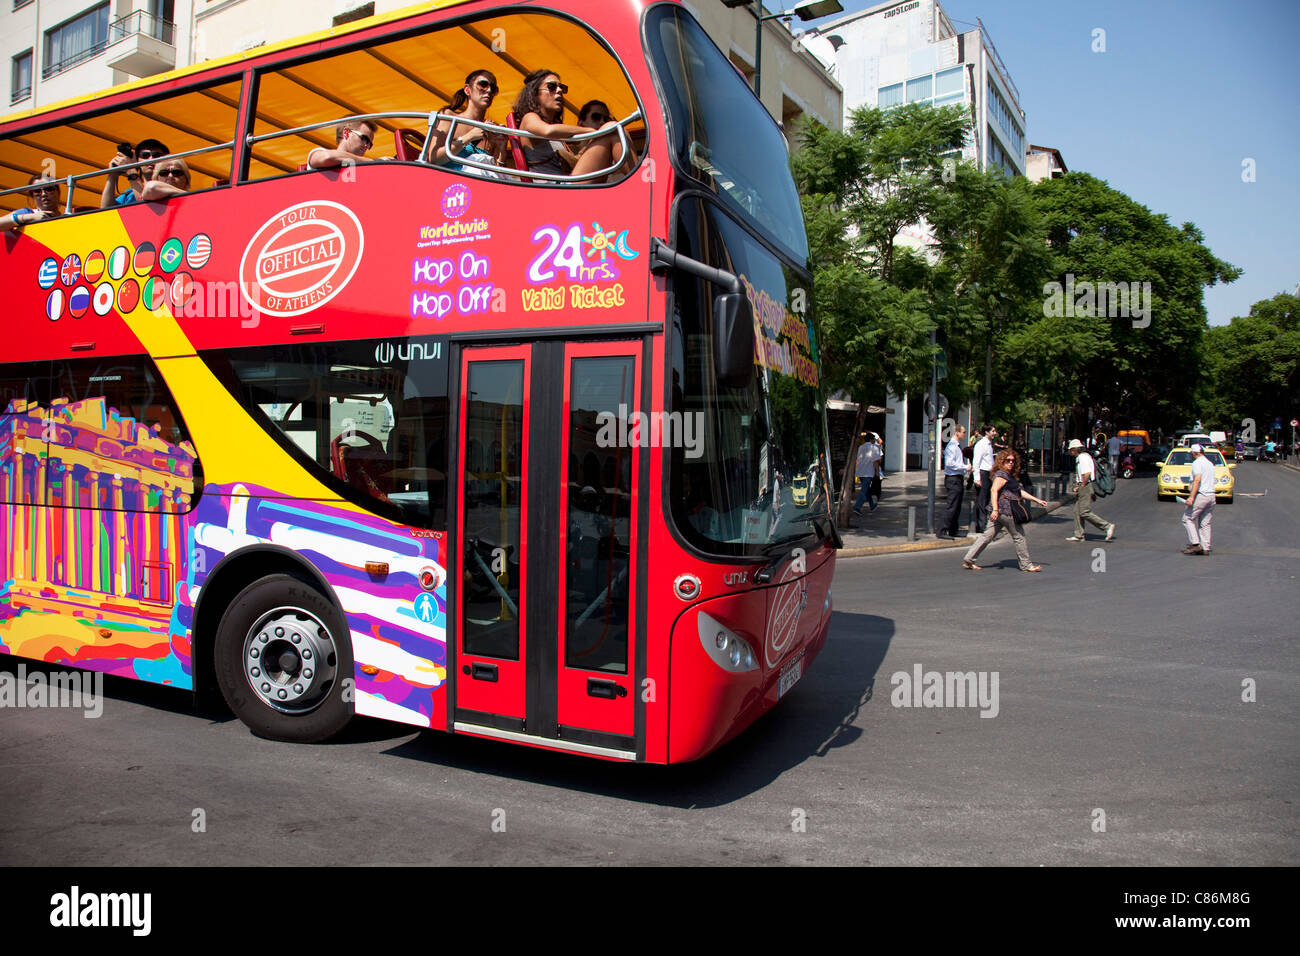 on a sightseeing bus in Monastiraki, Athens. Tourism brings important income for Greece and here it is very evident Stock Photo - Alamy